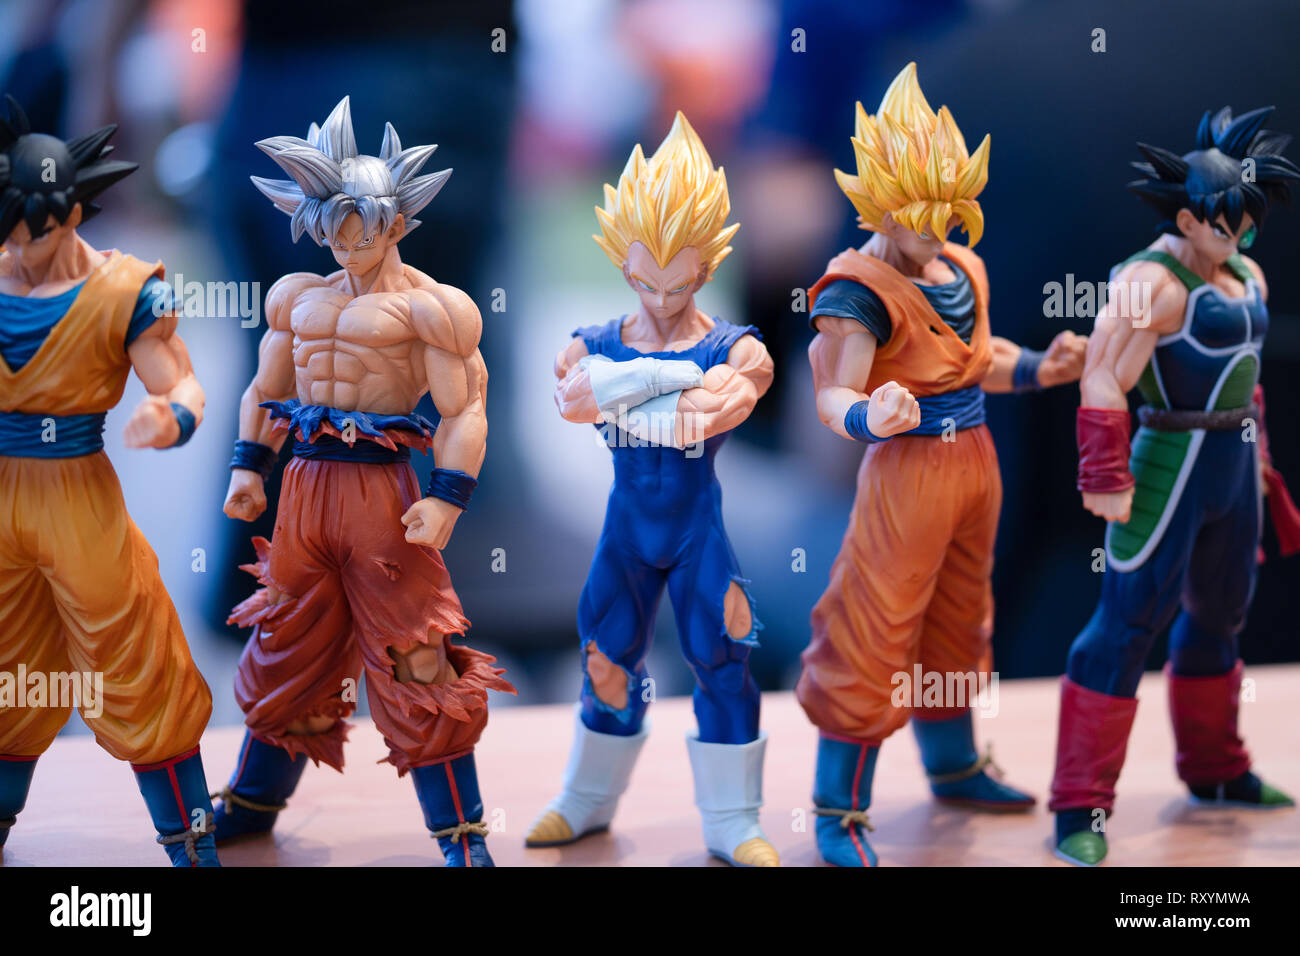 Dragon Ball Z Japanese Animation Charcter Figures On Display At Cosplay Event Cebu City Philippines Stock Photo Alamy